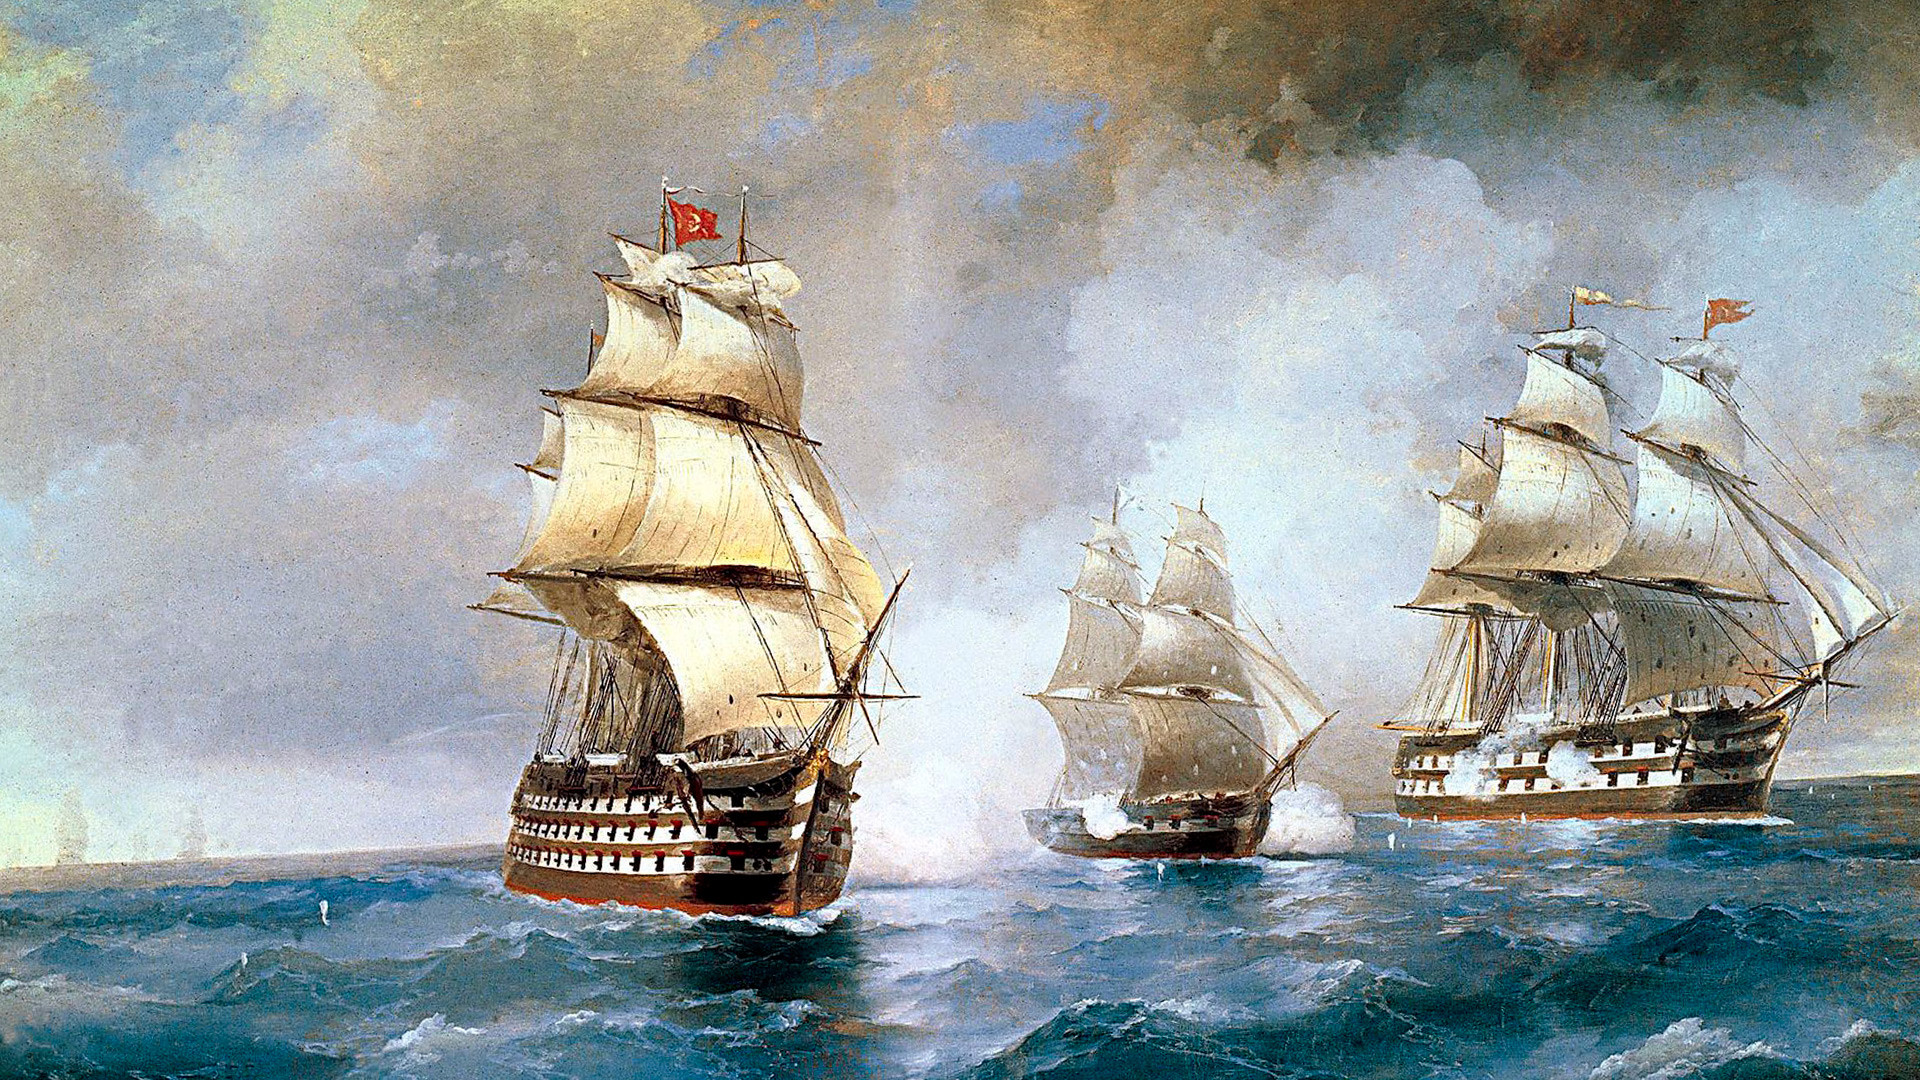 Brig Mercury attacked by two Turkish ships.